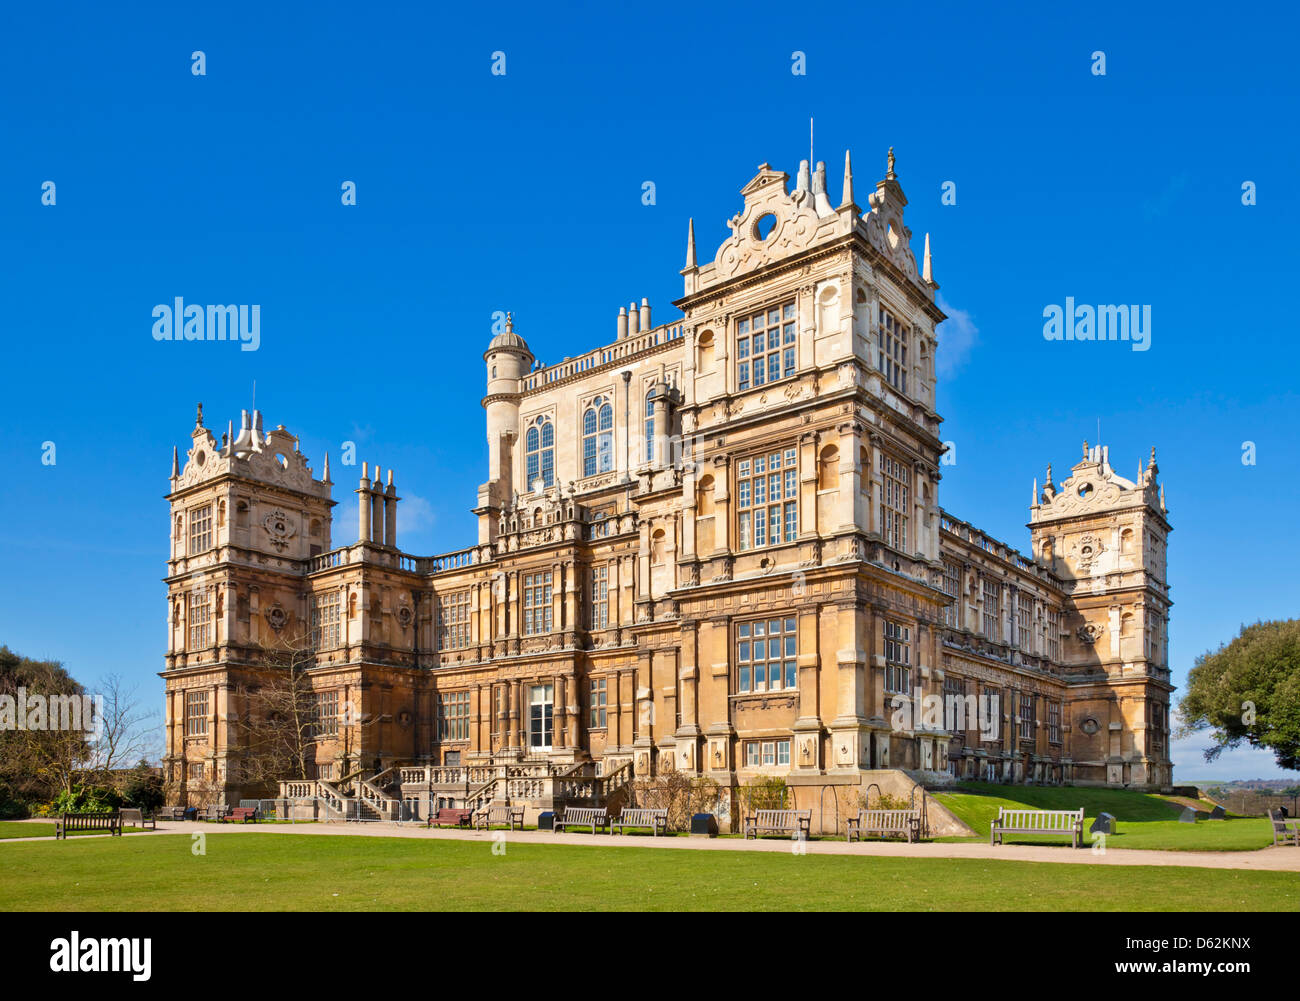 Wollaton Hall Museum à Wollaton Park, Nottingham, Notinghamshire, Angleterre, Royaume-Uni, GB, Europe Banque D'Images